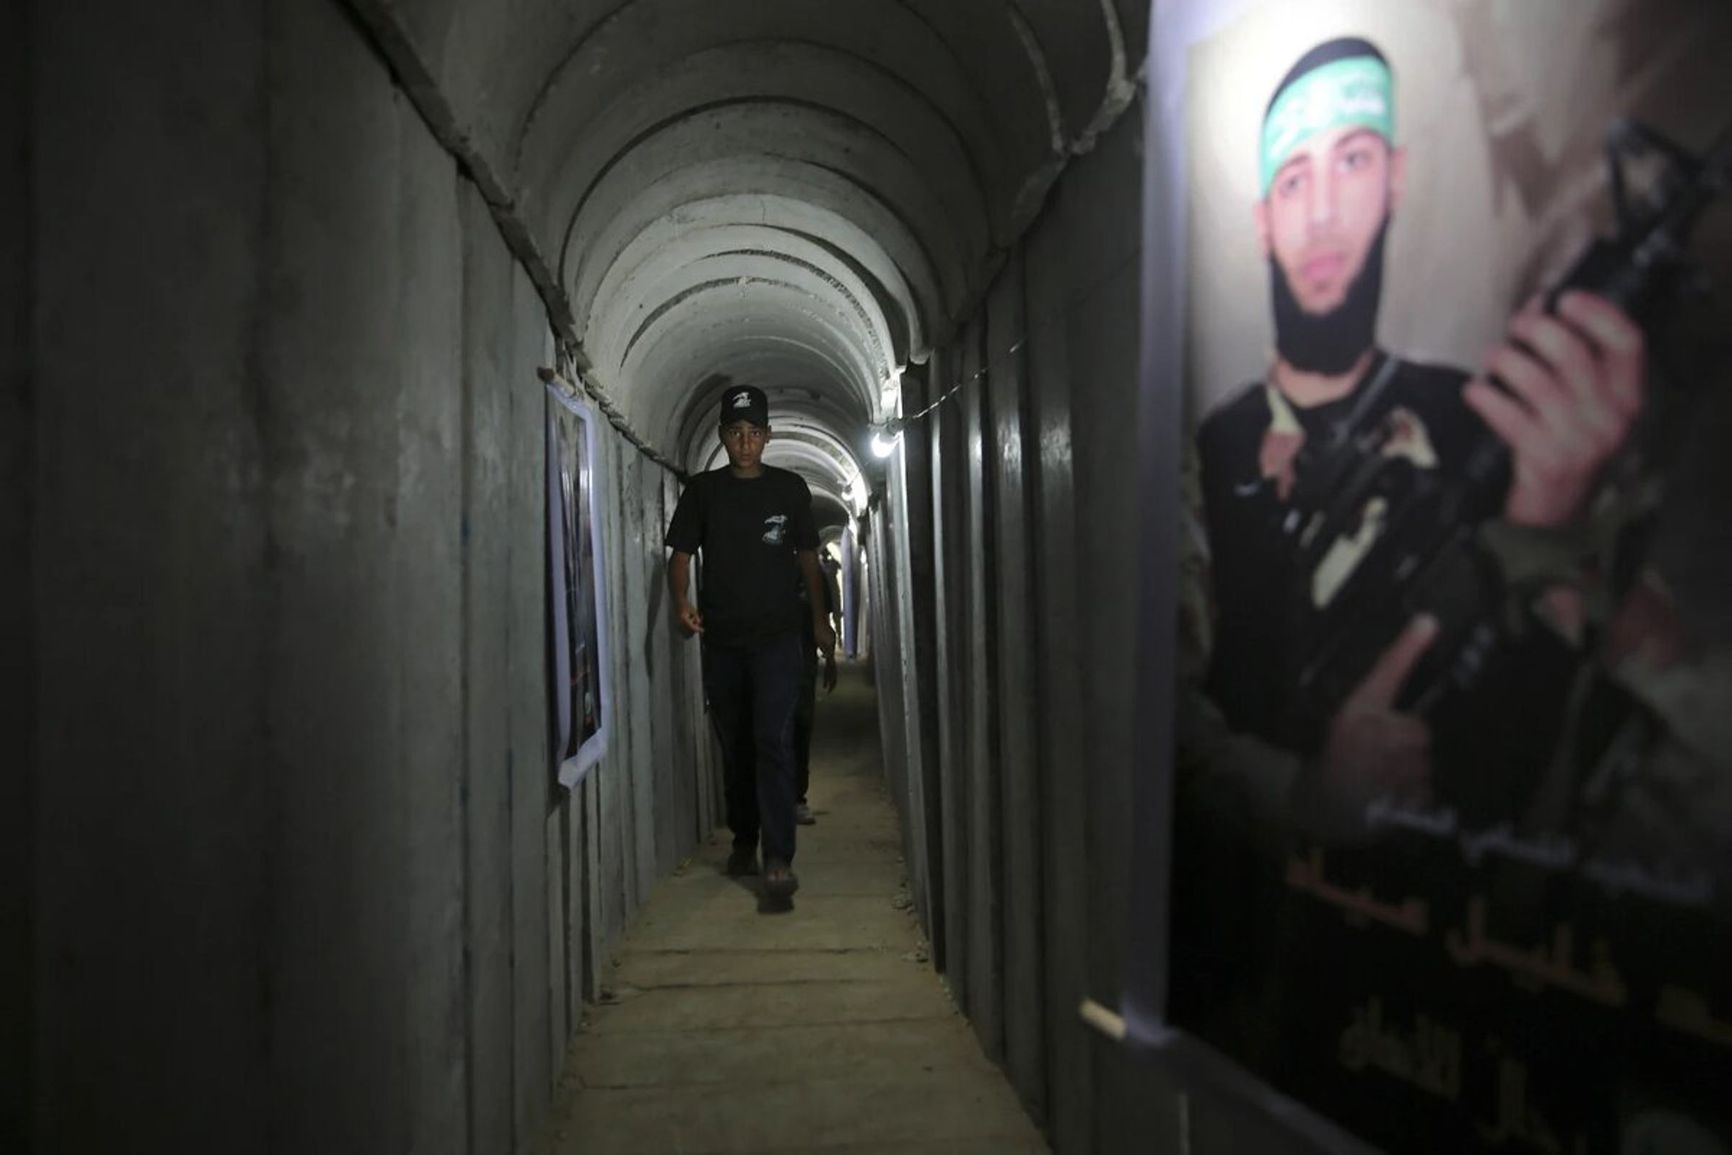 Beneath the Gaza Strip's coastal area, a vast network of underground tunnels with warehouses, bunkers, and surveillance cameras has been meticulously excavated